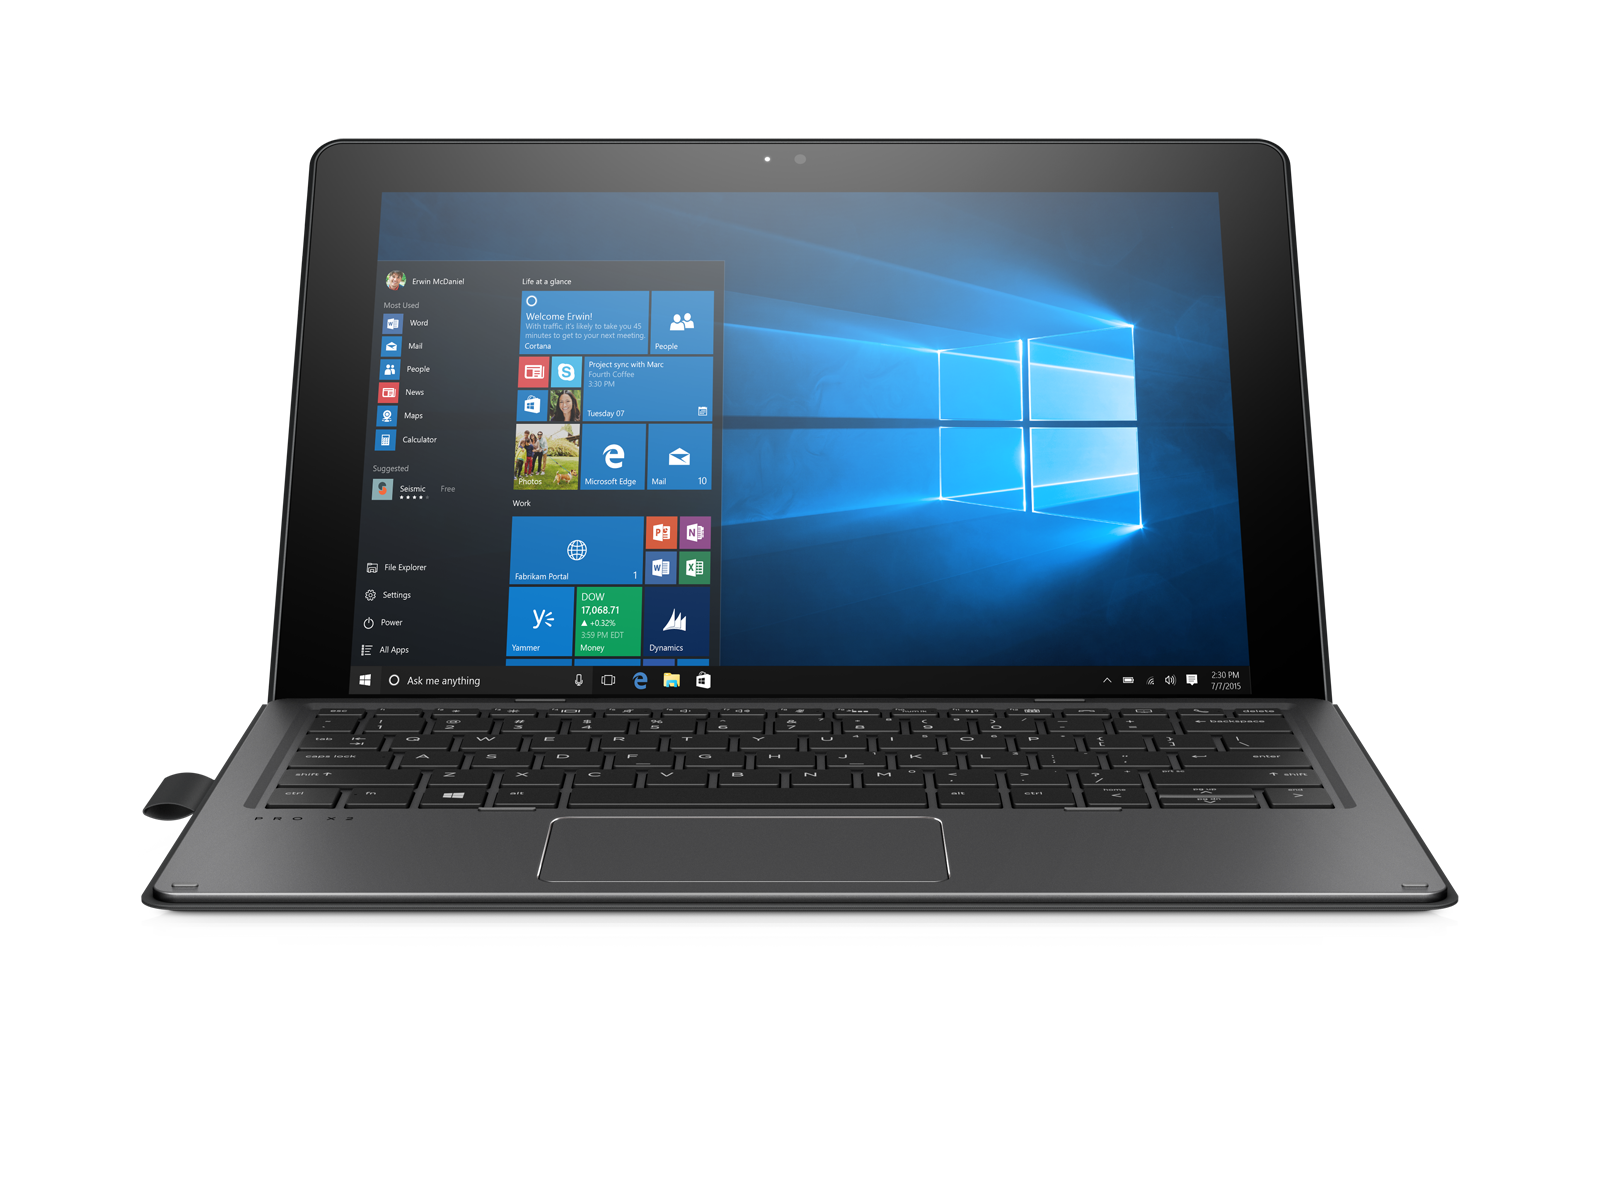 The HP Pro x2 512 G2 with Windows 10